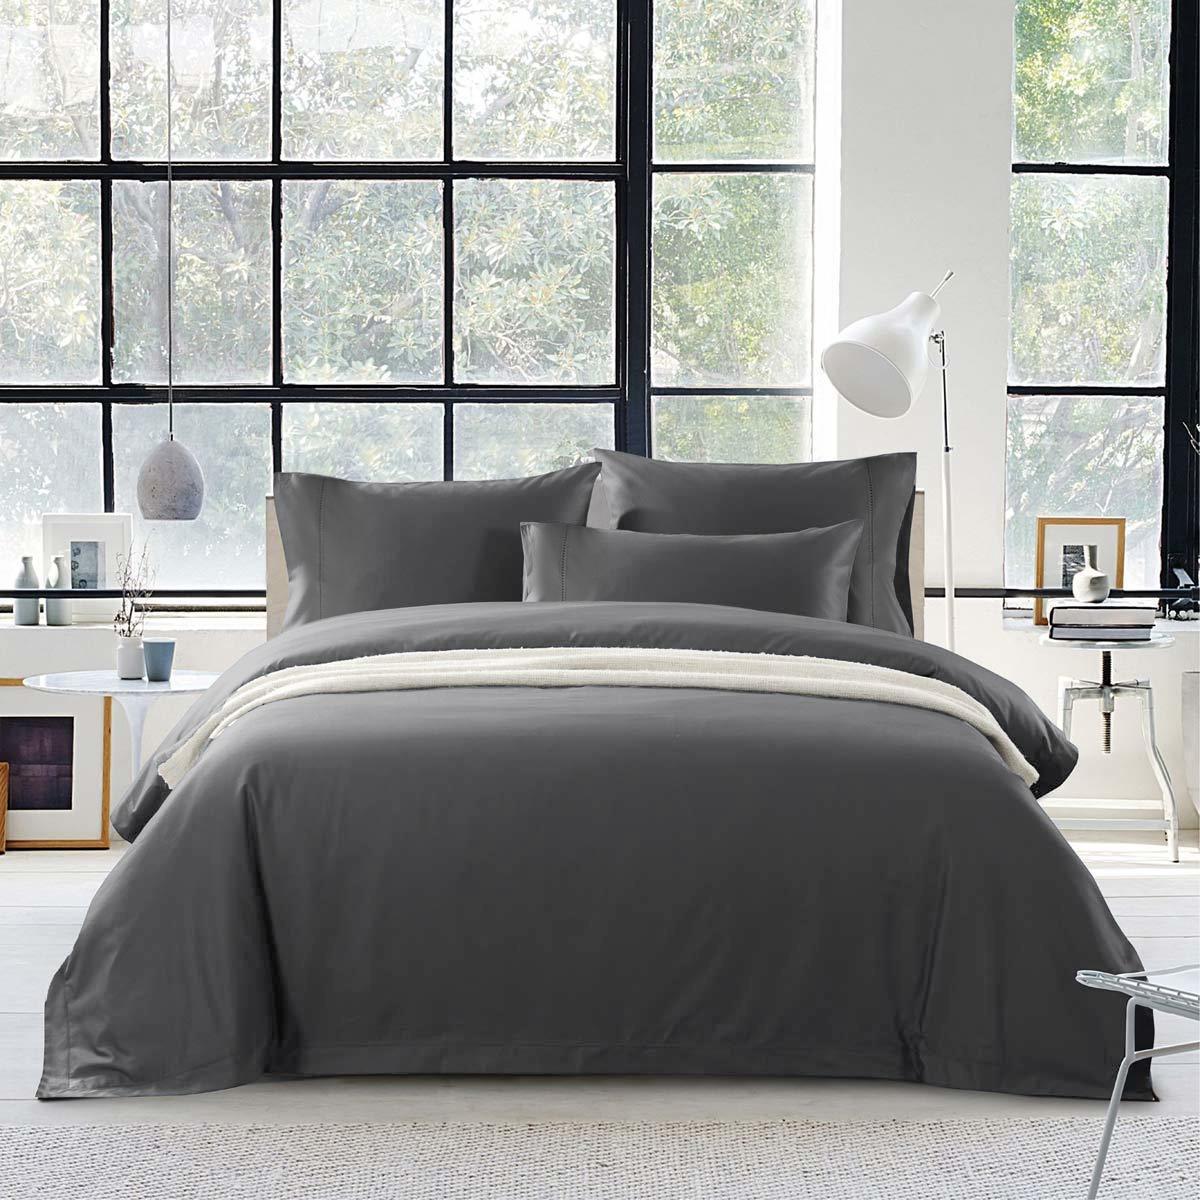 Ramesses Elite Spring Fresh Egyptian Cotton Sateen Quilt Cover Set 1500TC Queen Charcoal